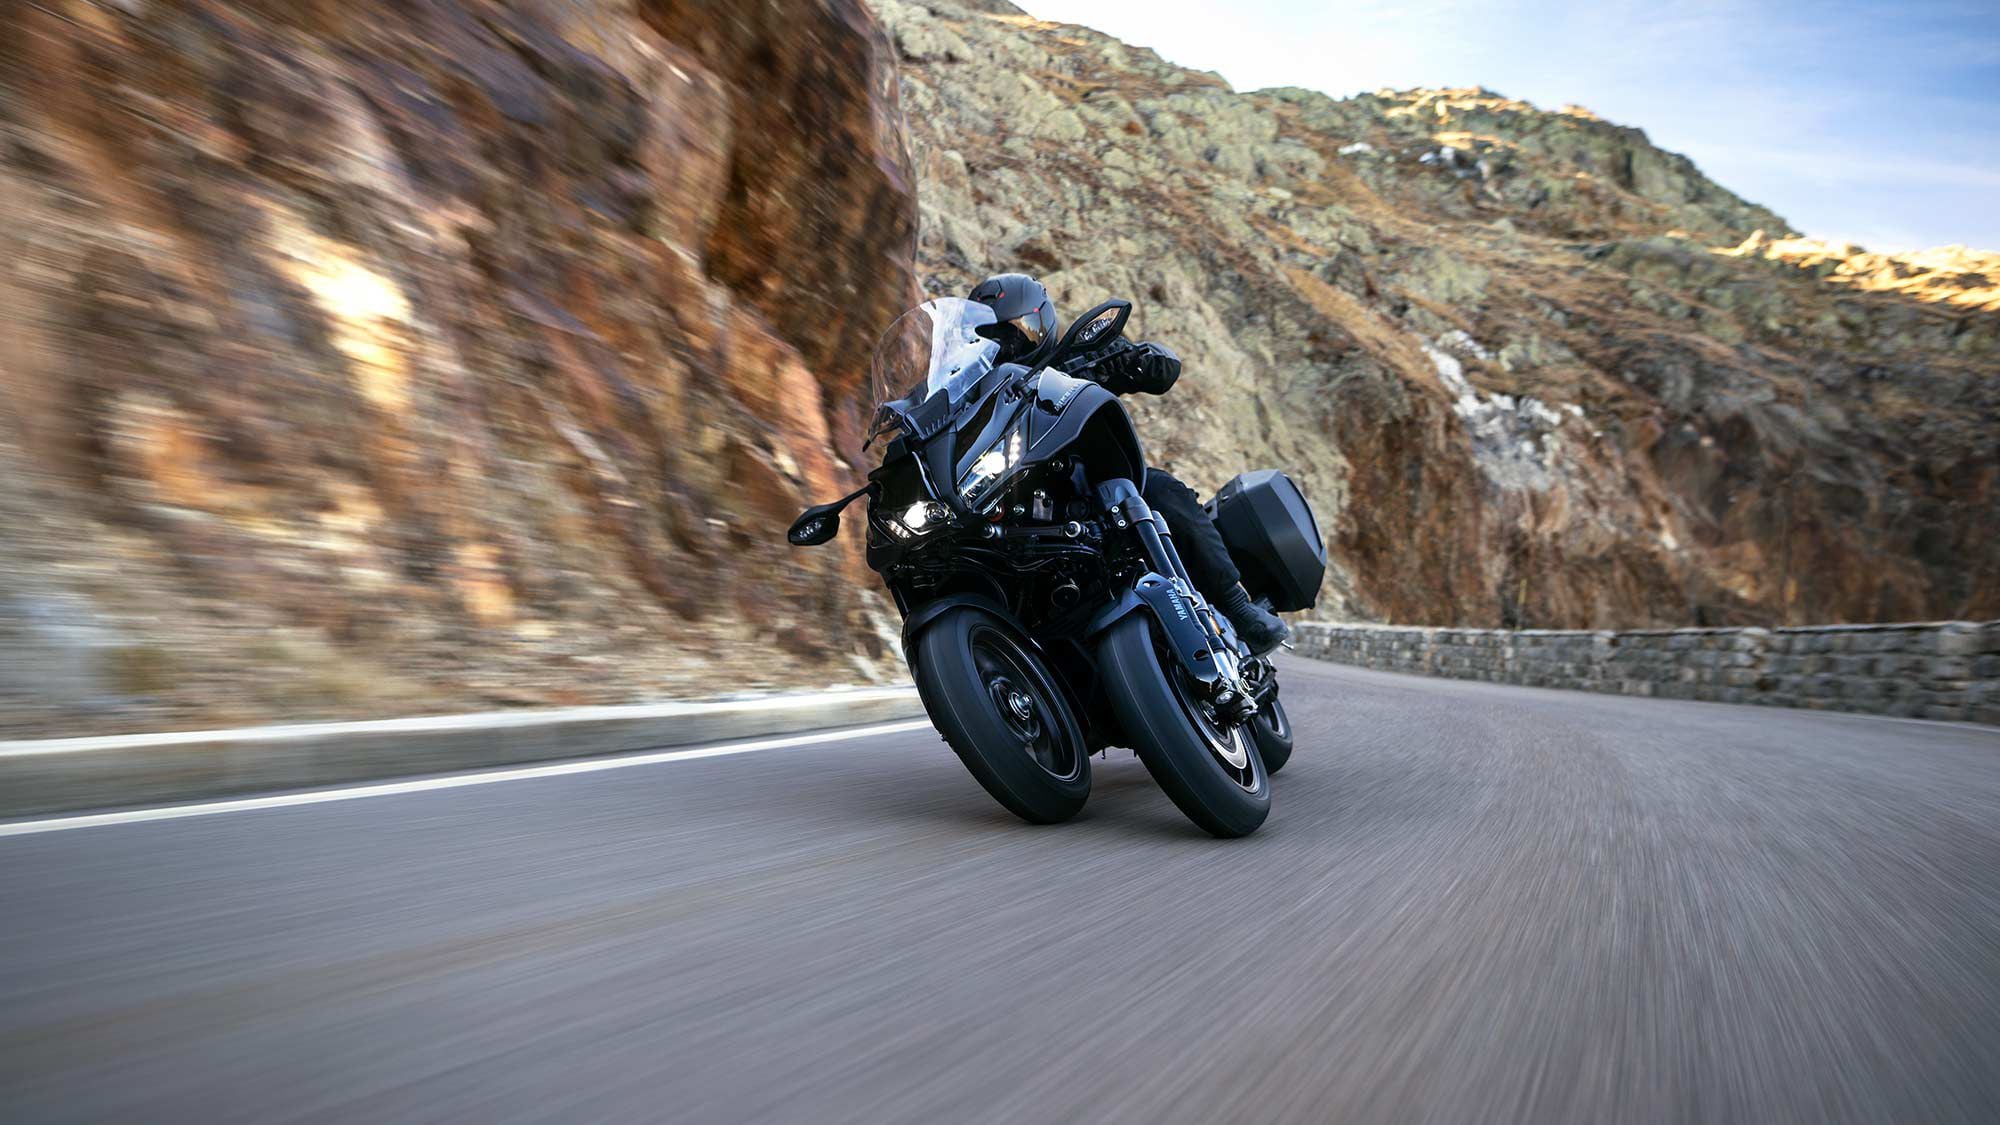 Yamaha upgraded the Niken’s quickshifter to offer both up and down shifting functionality.